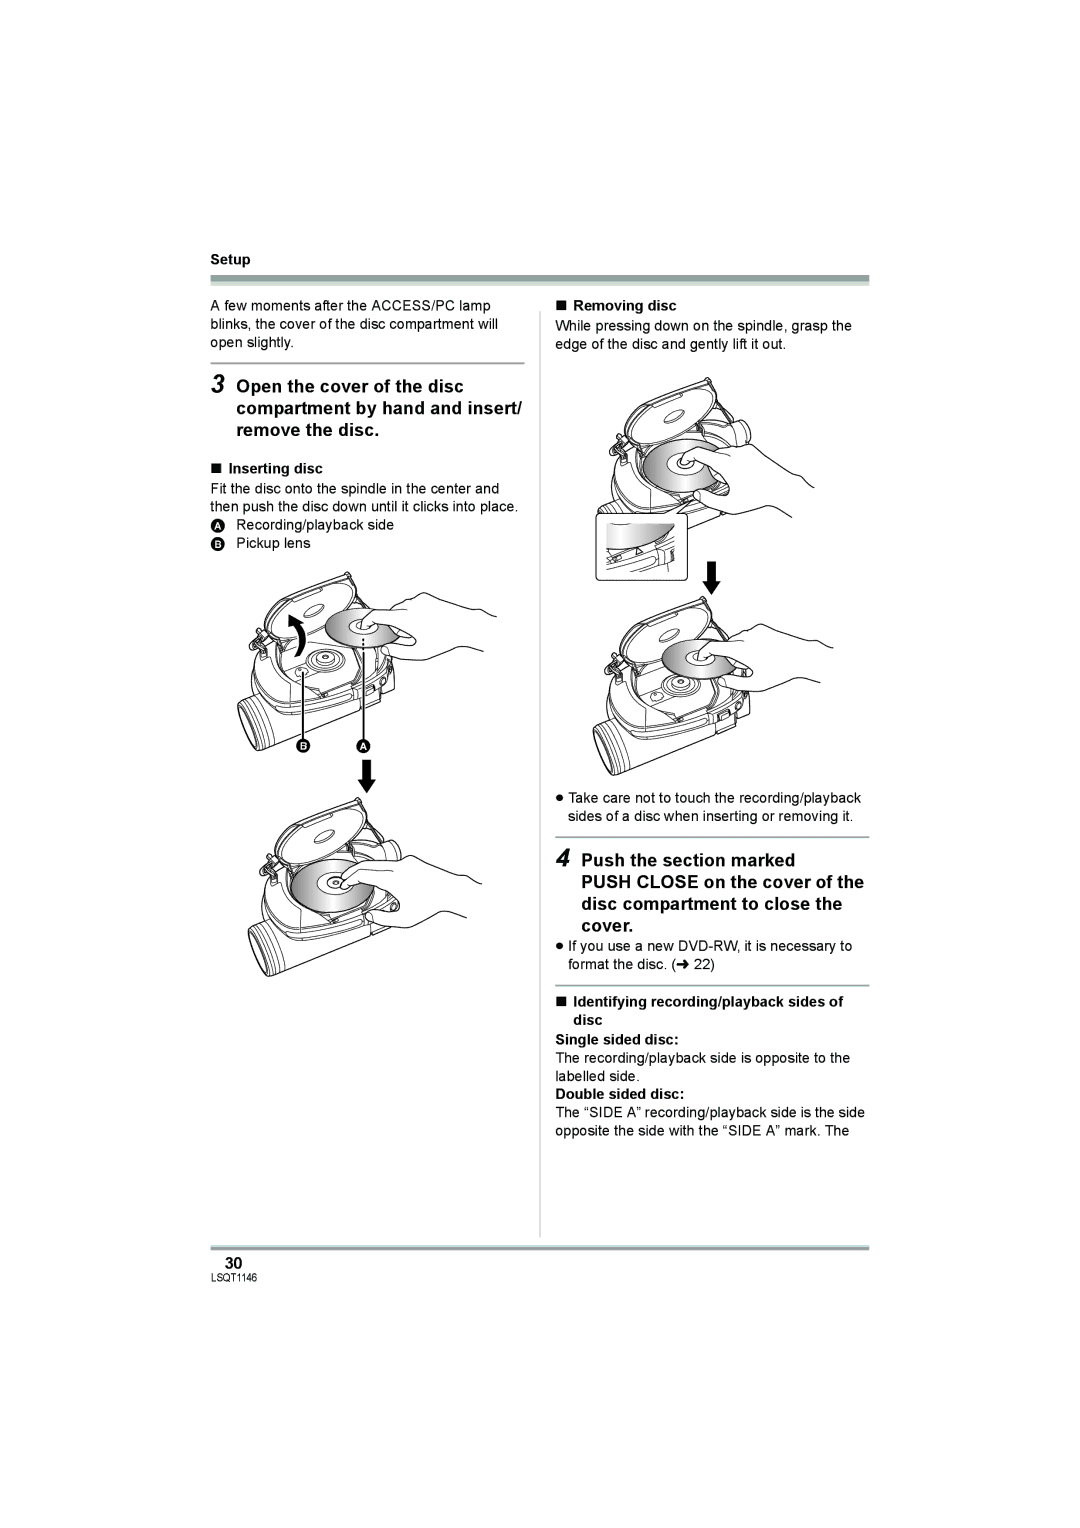 Panasonic VDR-D220 operating instructions Inserting disc, Removing disc, Double sided disc 